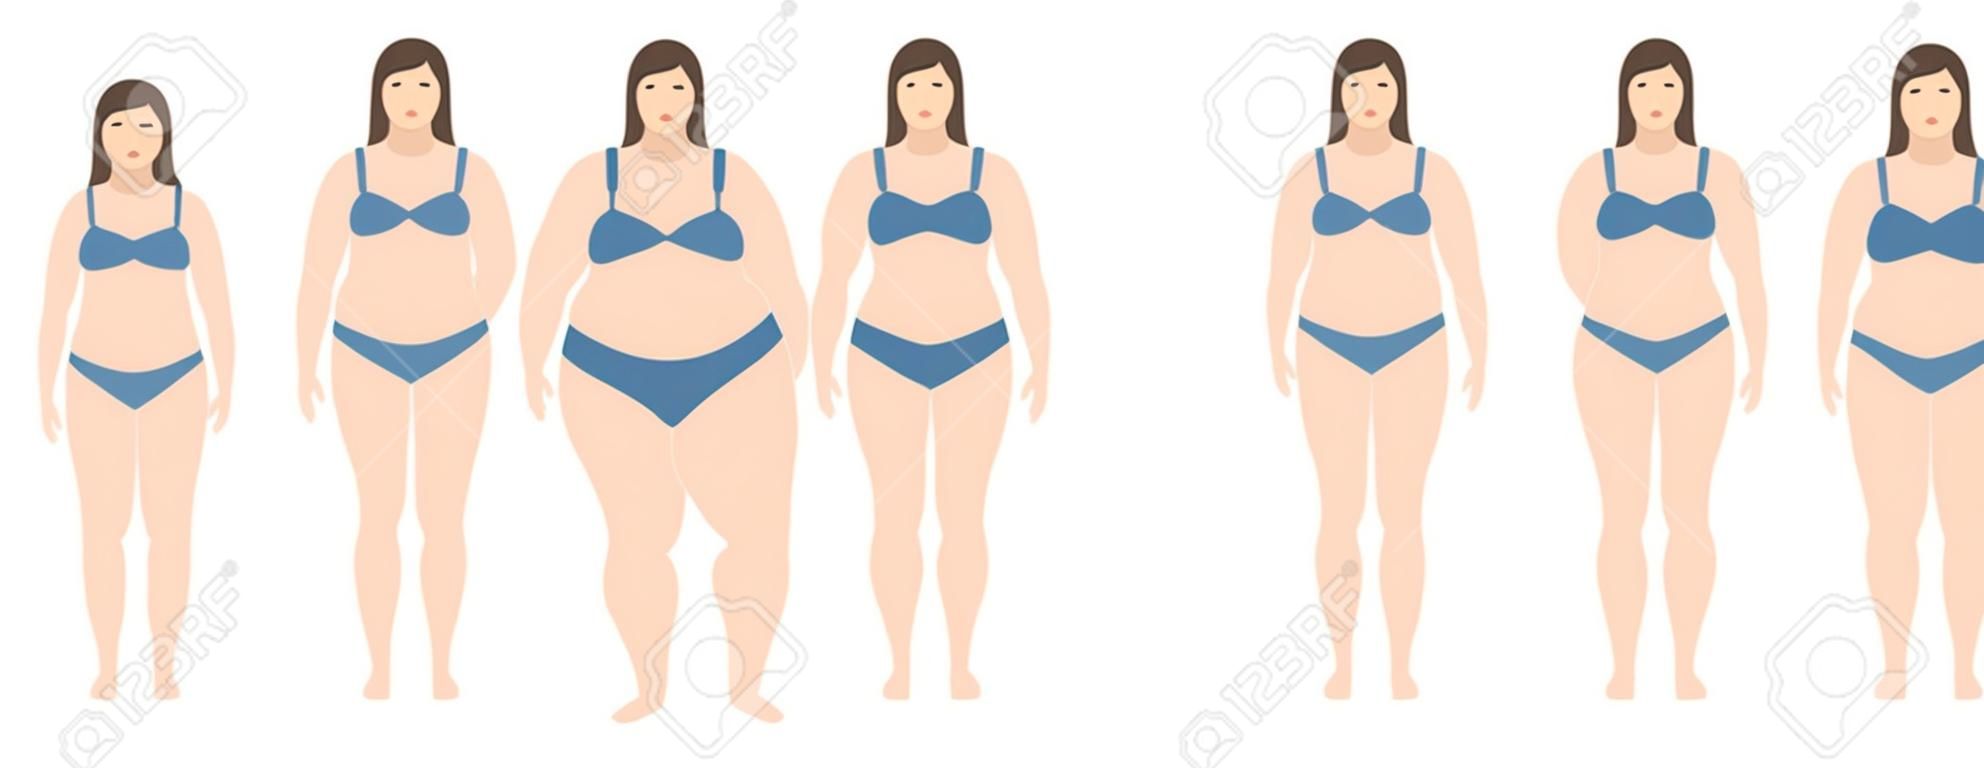 A Vector illustration of women with different weight from anorexia to extremely obese. Body mass index, weight loss concept.